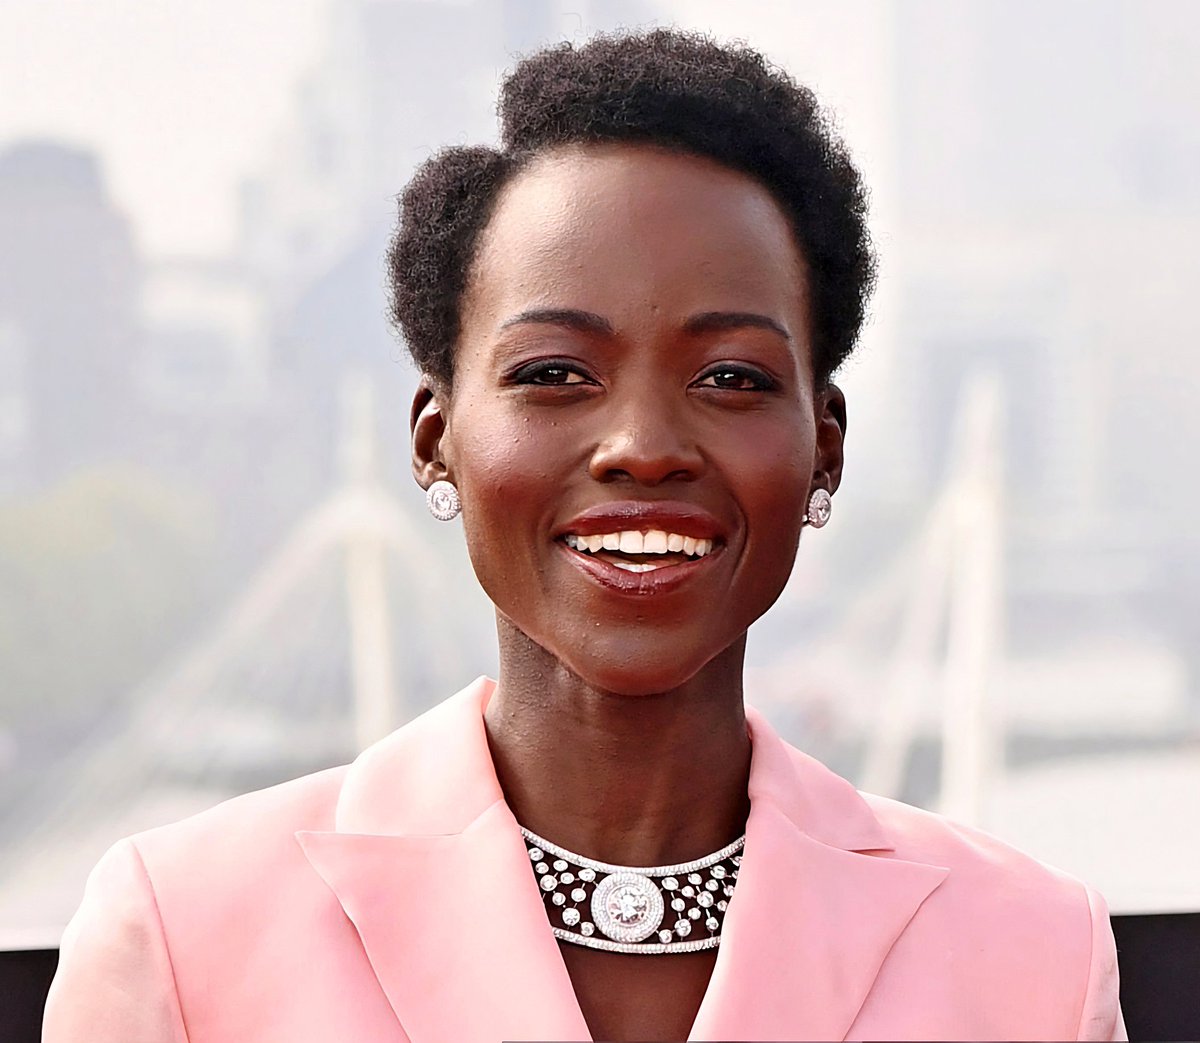 Lupita Nyong'o on the 𝑨 𝑸𝒖𝒊𝒆𝒕 𝑷𝒍𝒂𝒄𝒆: 𝑫𝒂𝒚 𝑶𝒏𝒆 Red Carpet in De Beers 💎 @Lupita_Nyongo @DeBeers @AQuietPlace 

#LupitaNyongo #DeBeers #jewelry #jewelryaddict #JewelryLove #Jeweled #style #StyleOfTheDay #styles #Fashionista #fashionstyle #fashionblogger #fashion